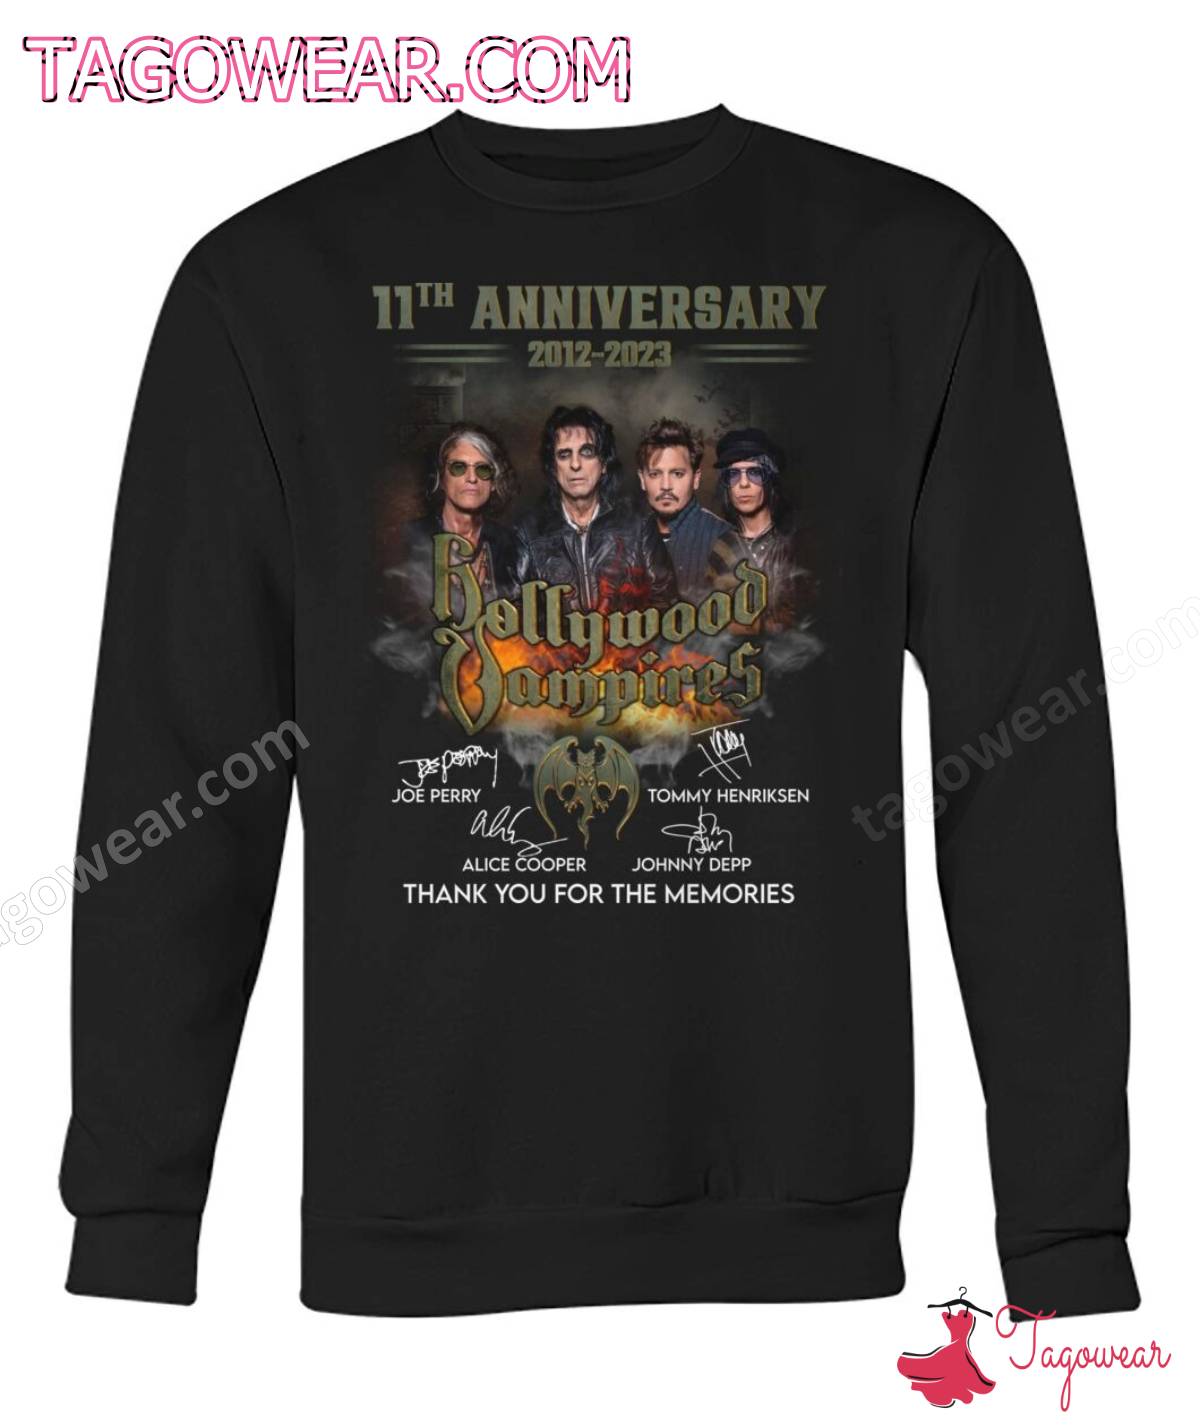 11th Anniversary 2012-2023 Hollywood Vampires Signatures Thank You For The Memories Shirt, Tank Top b